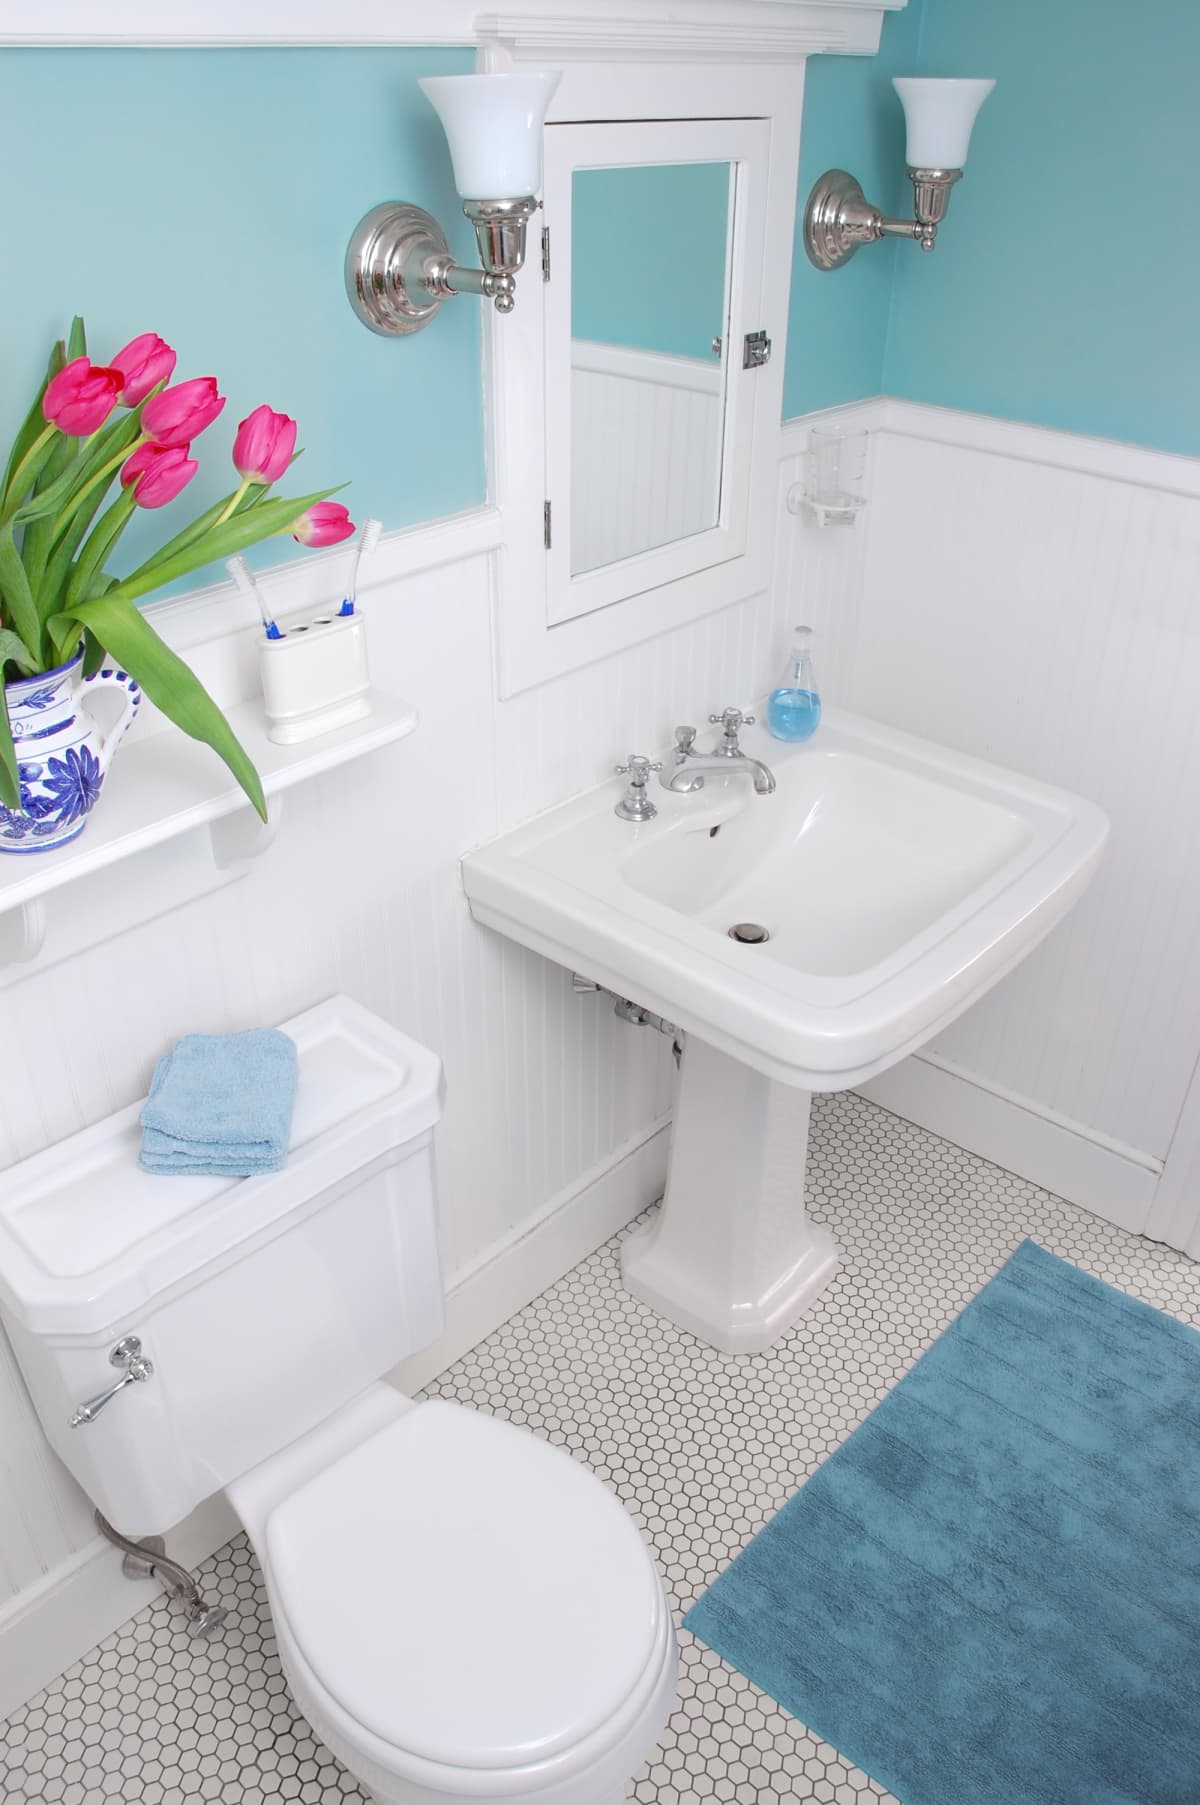 A white bathroom with blue walls.